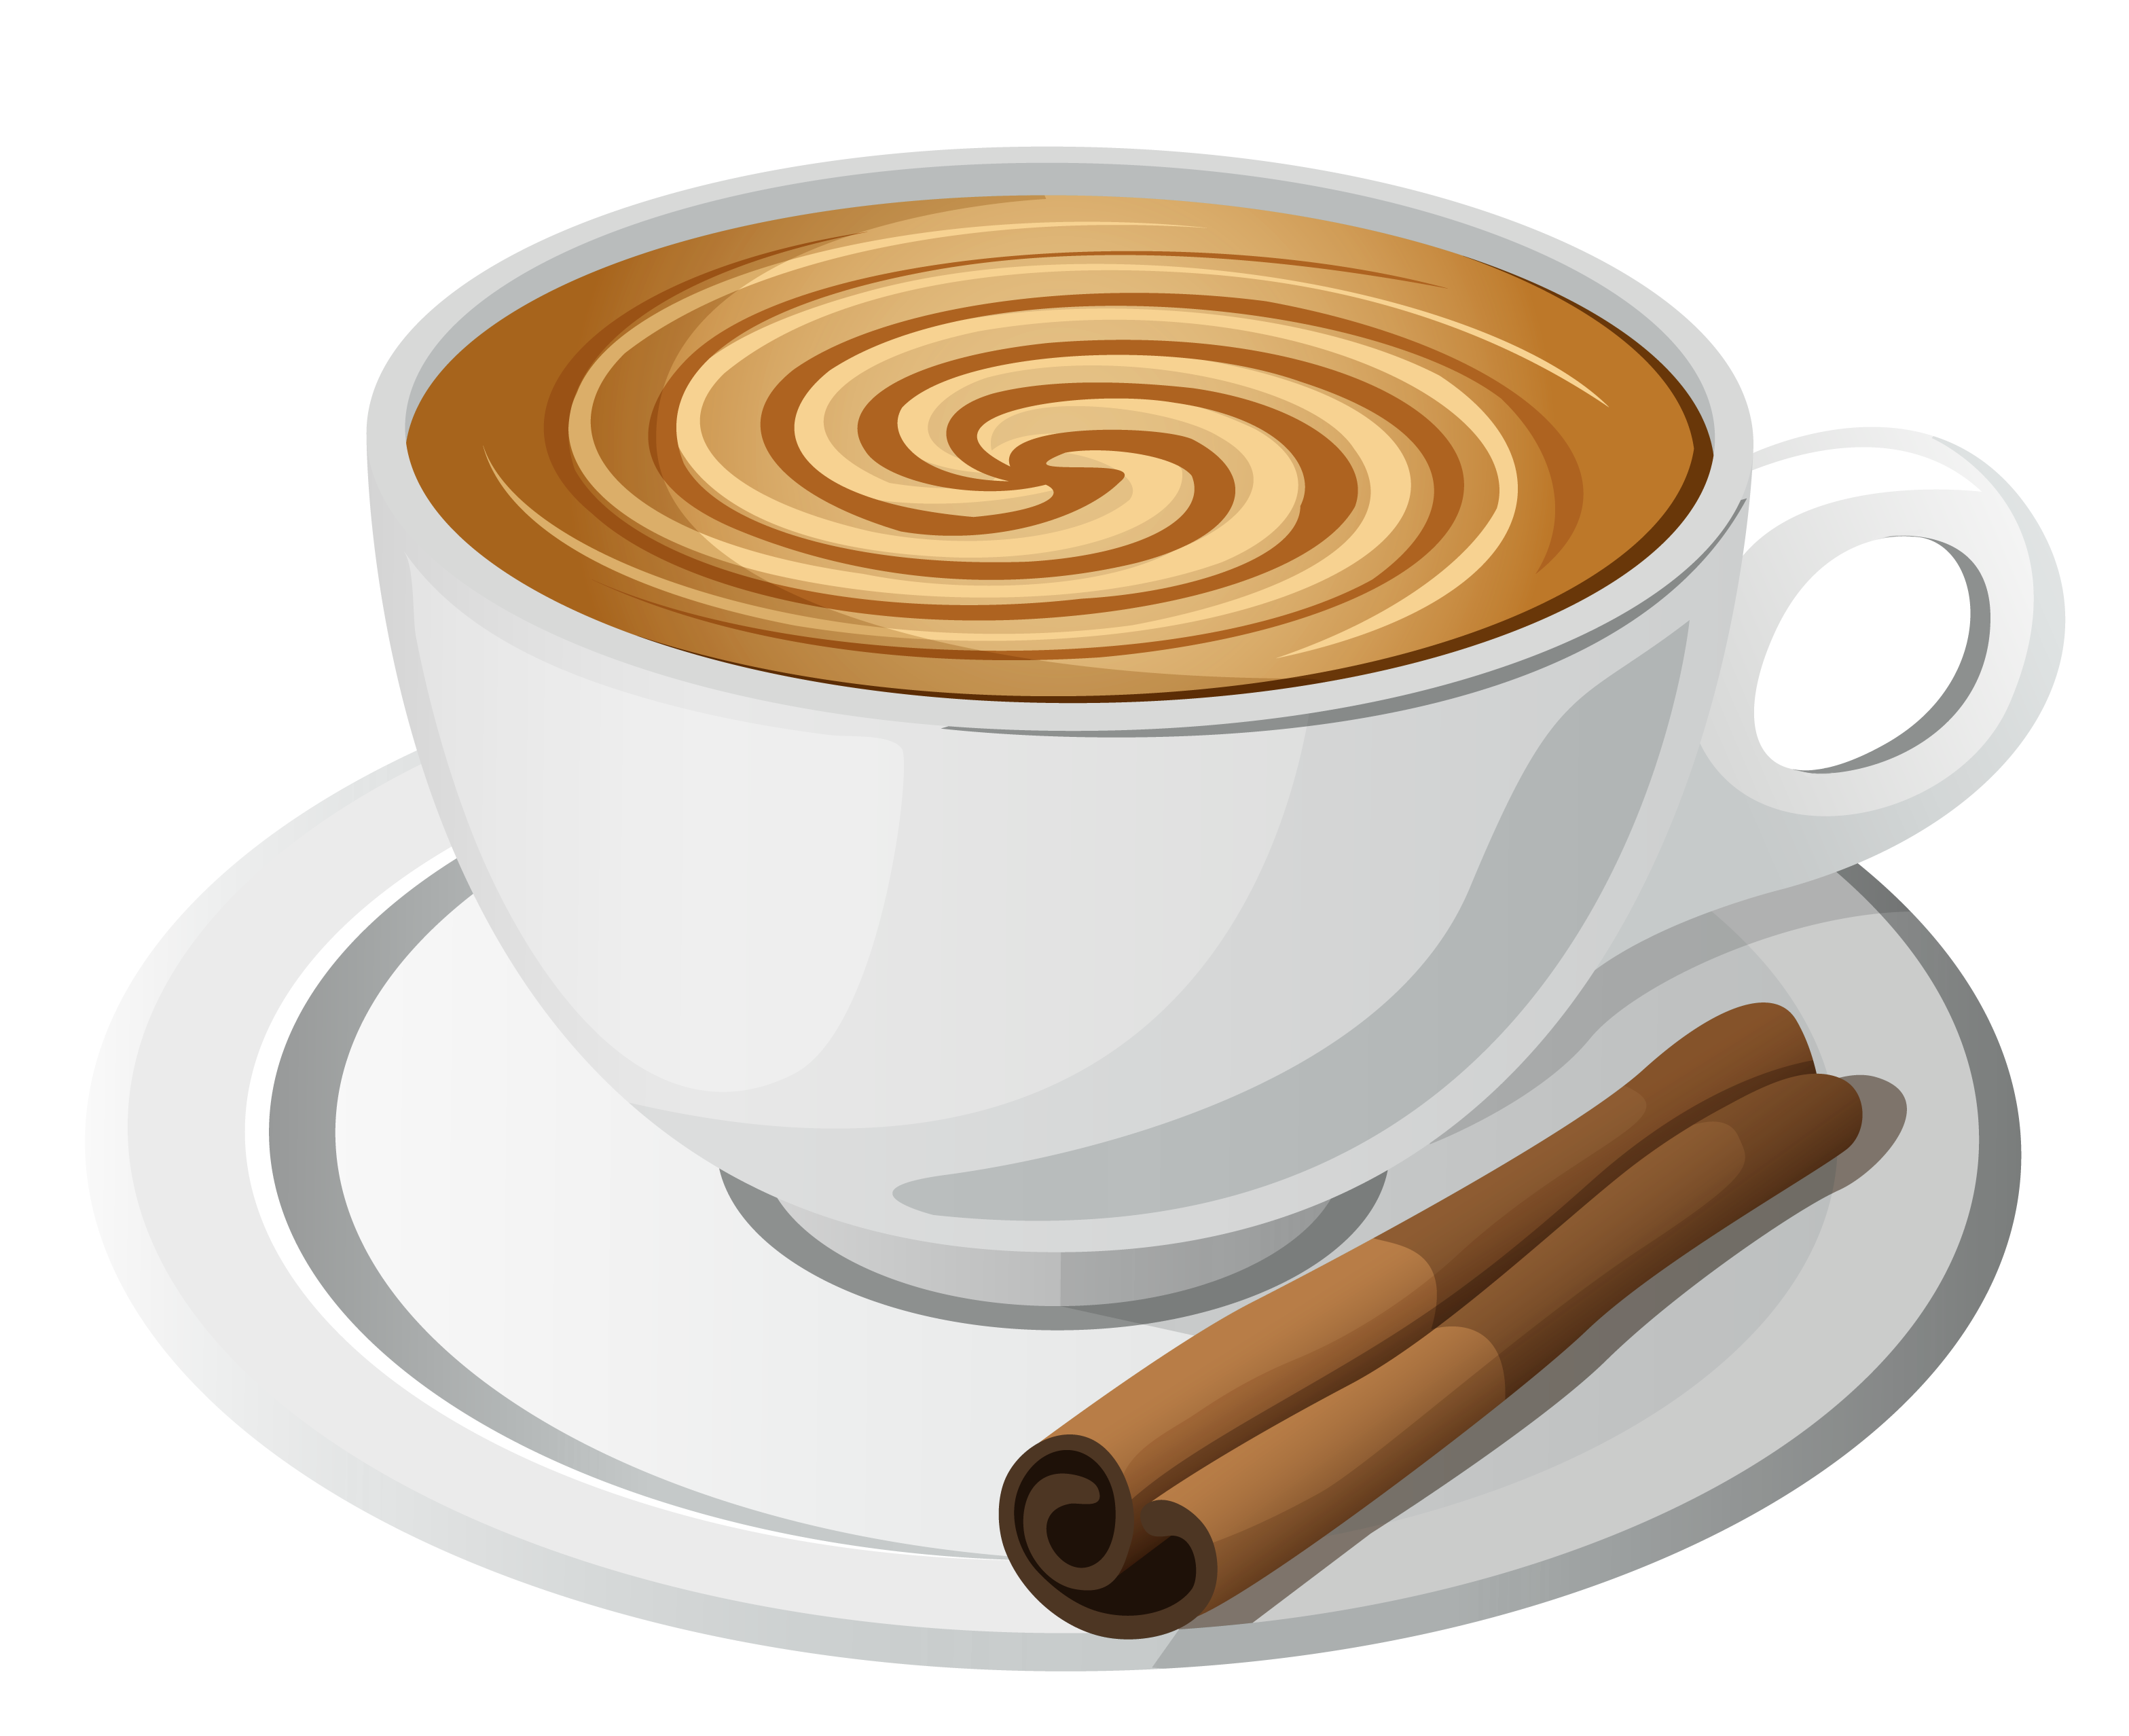 Cappuccino png images free. Latte clipart coffee tea